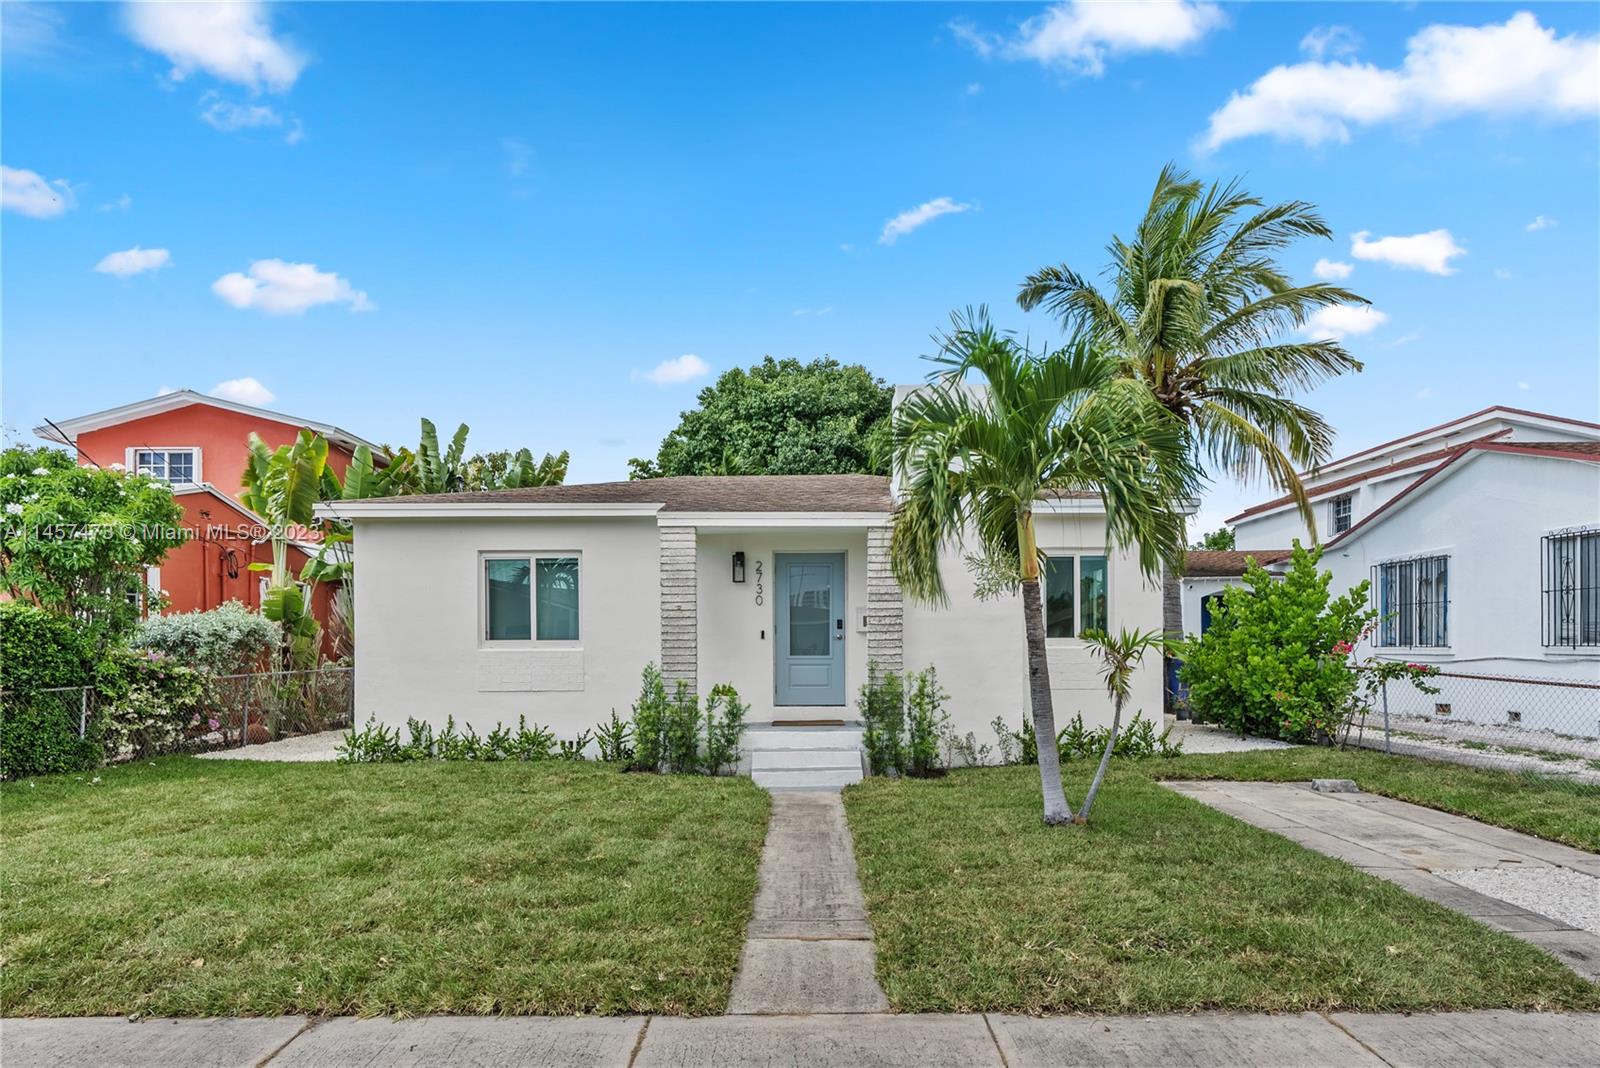 Relocation forces sale. Turnkey, fully renovated 3 bedroom / 2 bath home with wood floors in the main area. Gorgeous kitchen w/ stainless steel appliances and quartz countertops, family room, plus a fireplace! Fully fenced yard. Minutes from Coconut Grove, Coral Gables, Brickell, Downtown, Midtown, and Key Biscayne! A must see!